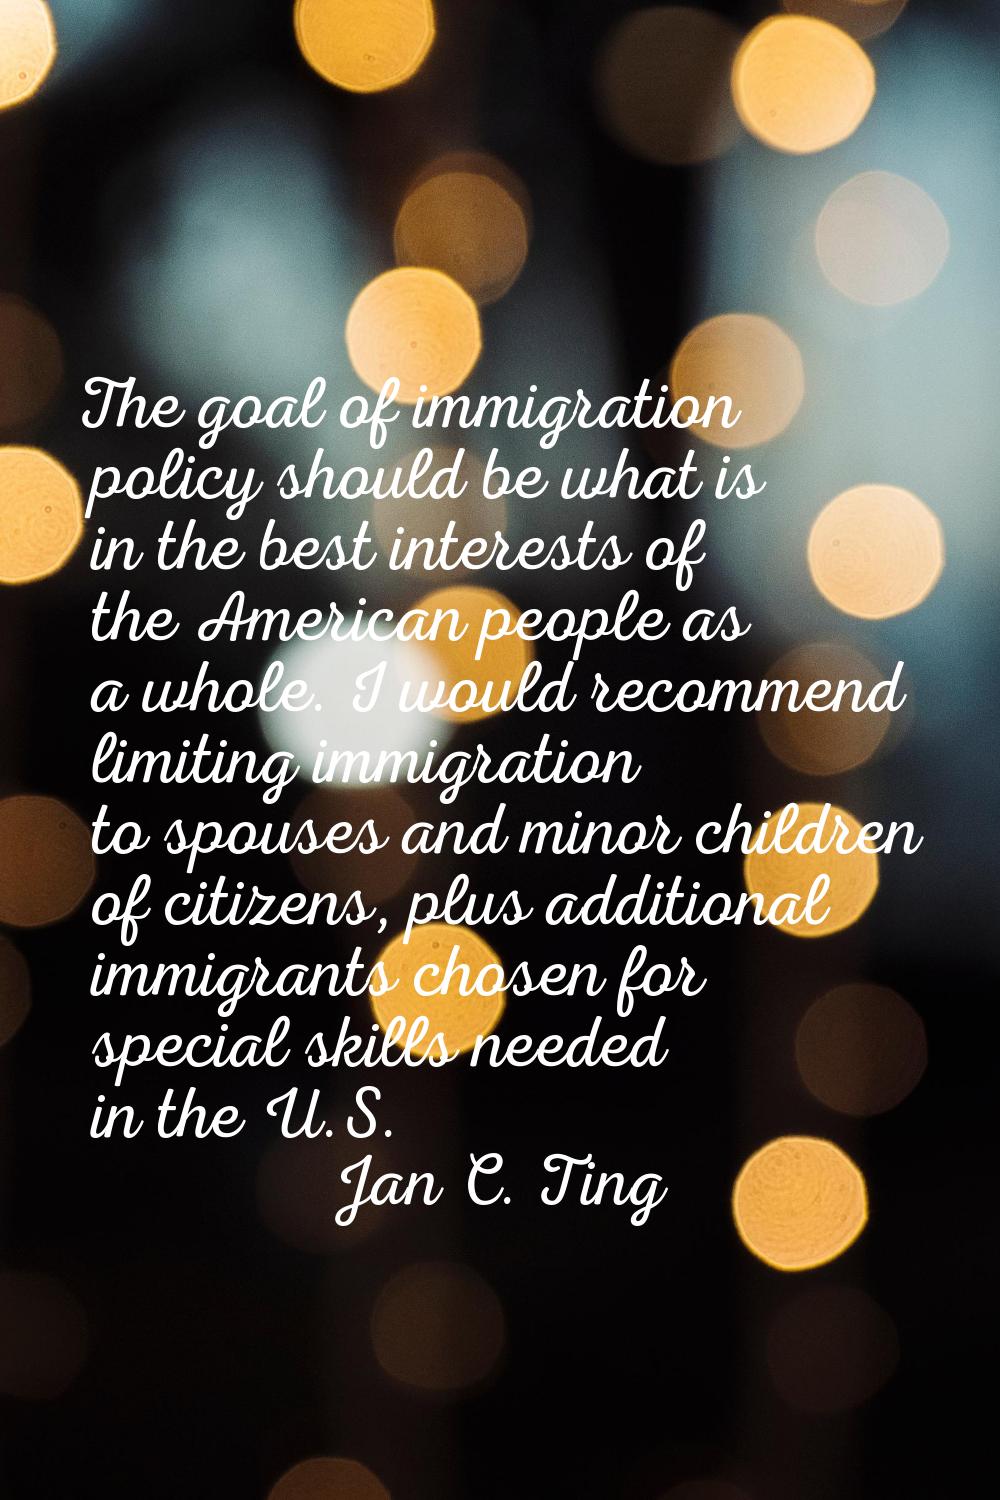 The goal of immigration policy should be what is in the best interests of the American people as a 